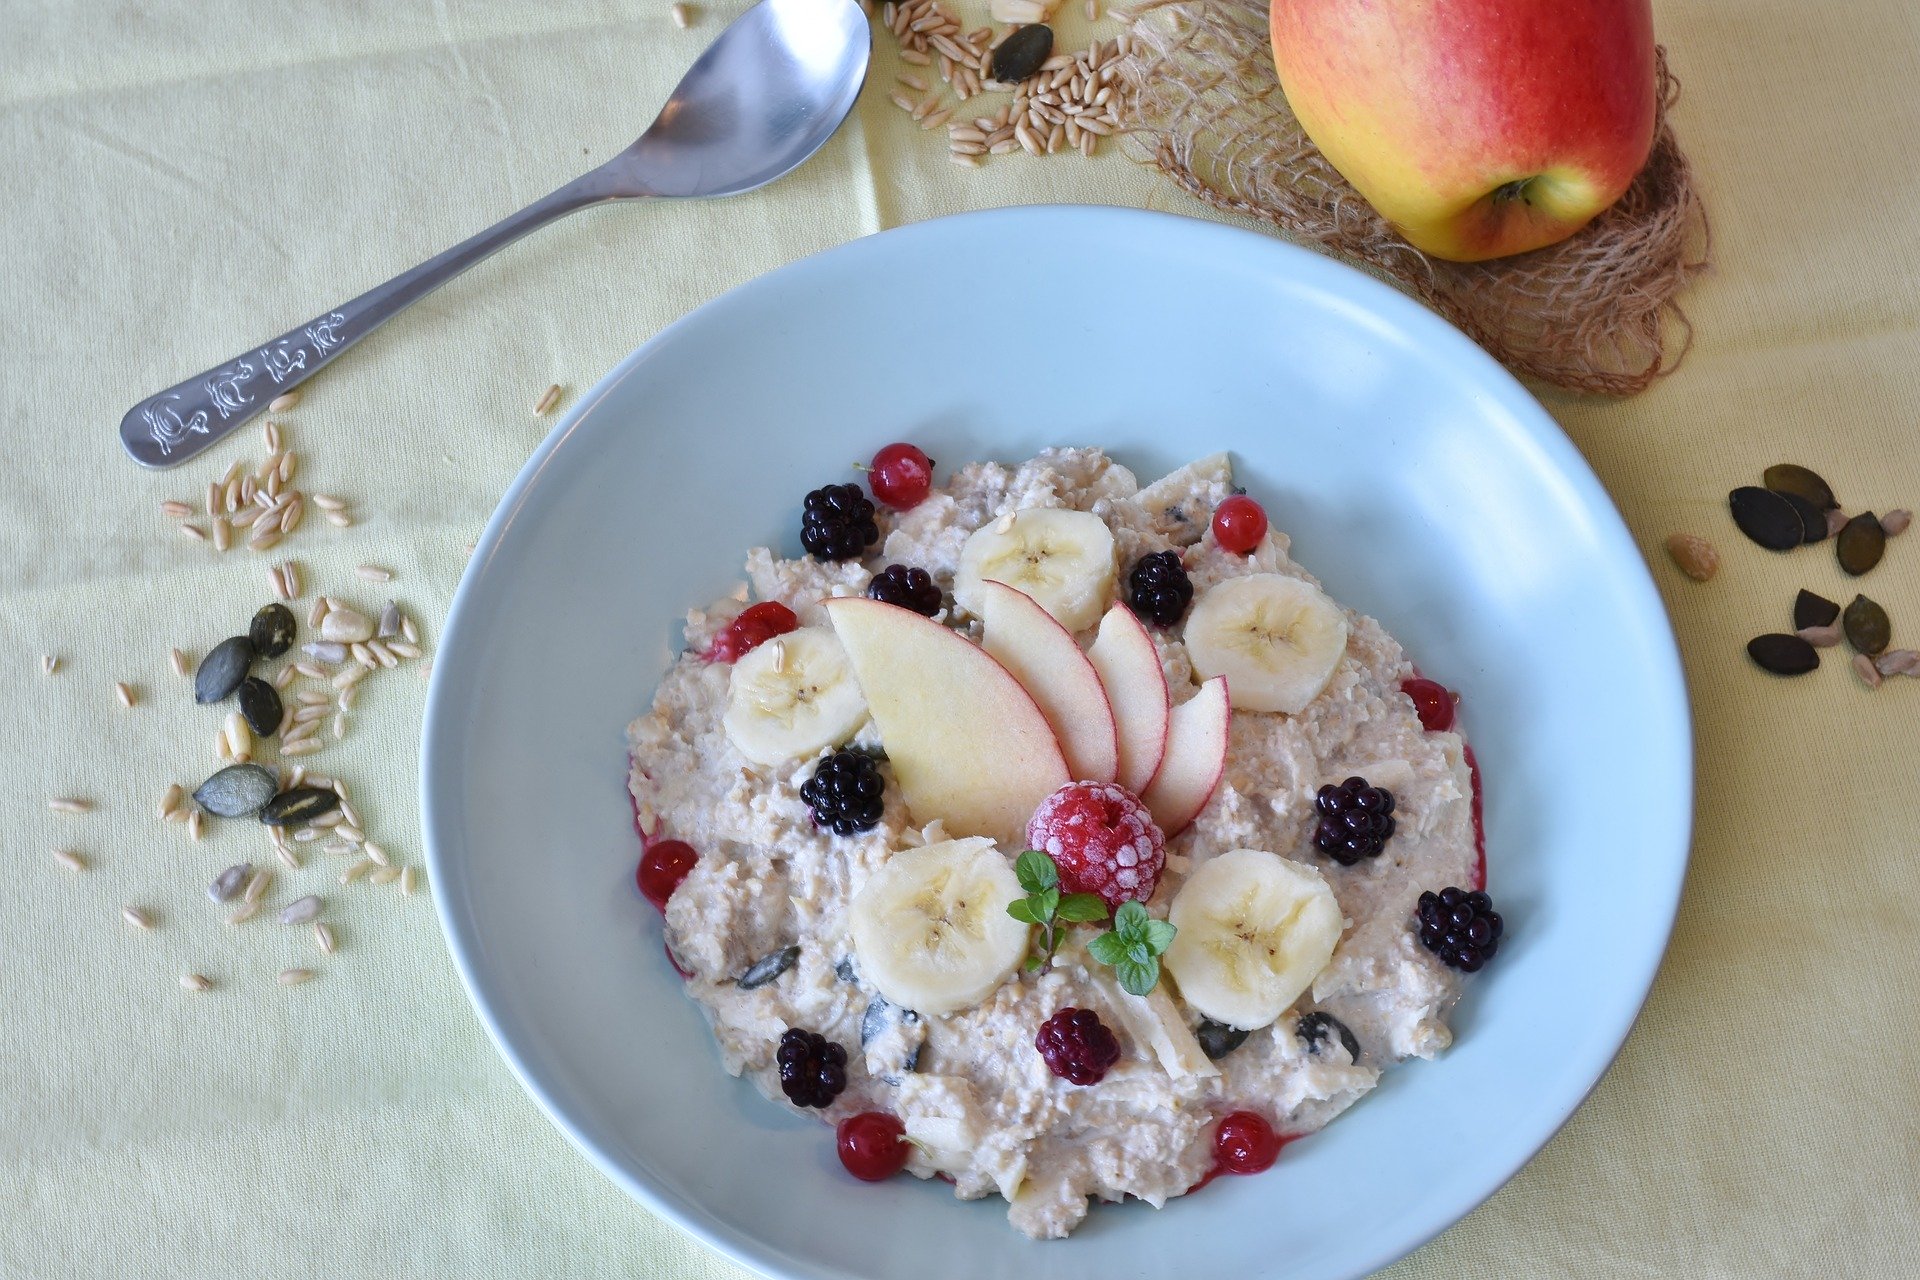 Cereals, fruit and dairy are essential in a healthy breakfast.